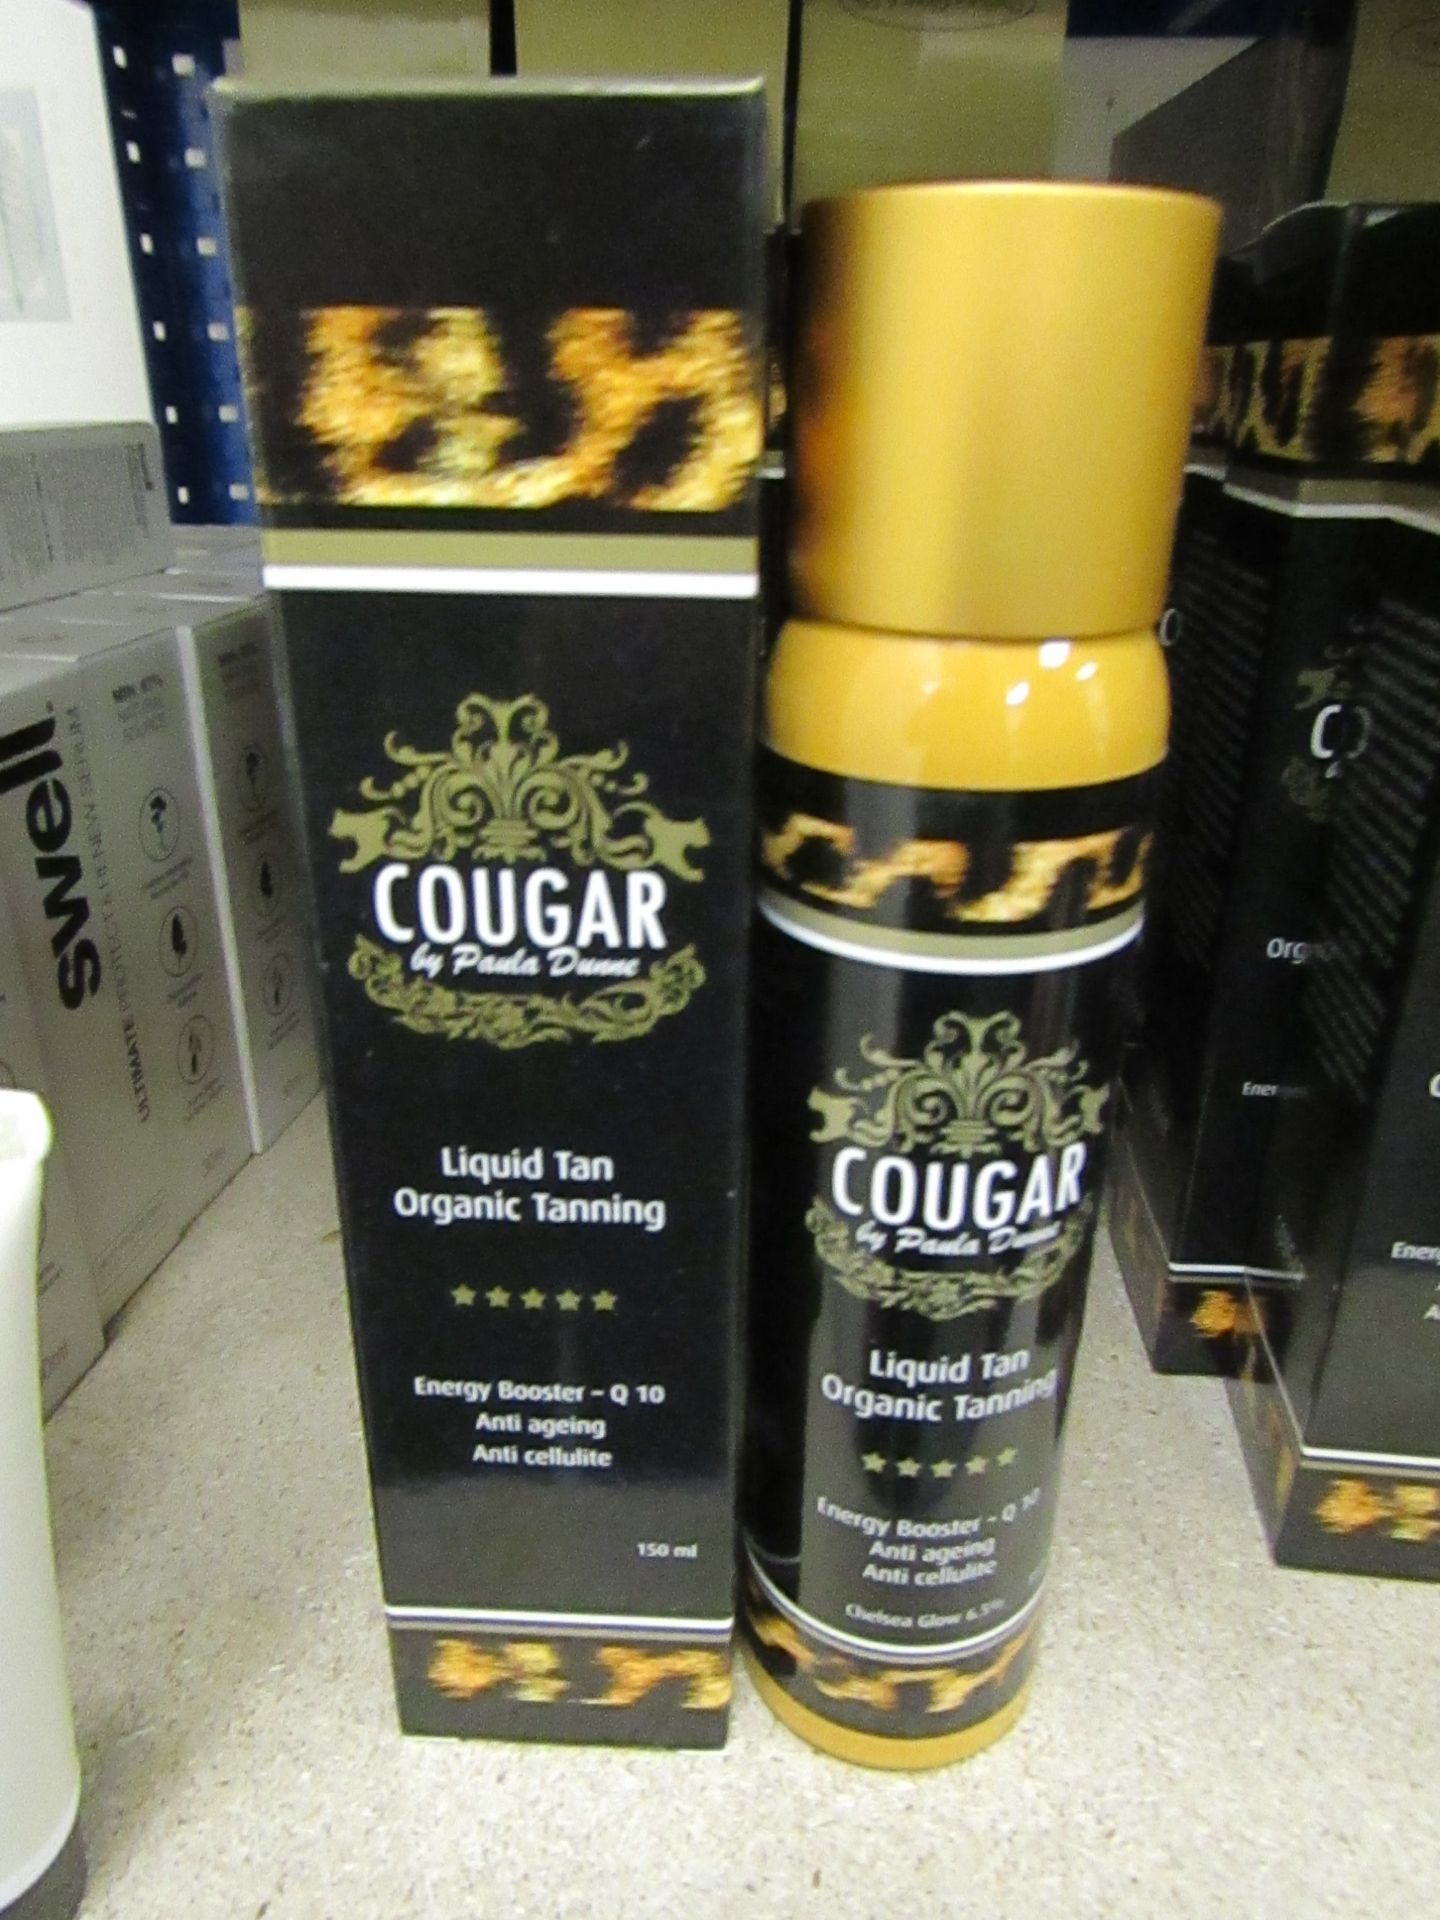 2 x Cougar 150ml Chelsea Glow 6.5% Organic Tanning Liquid Tan, both brand new and boxed.